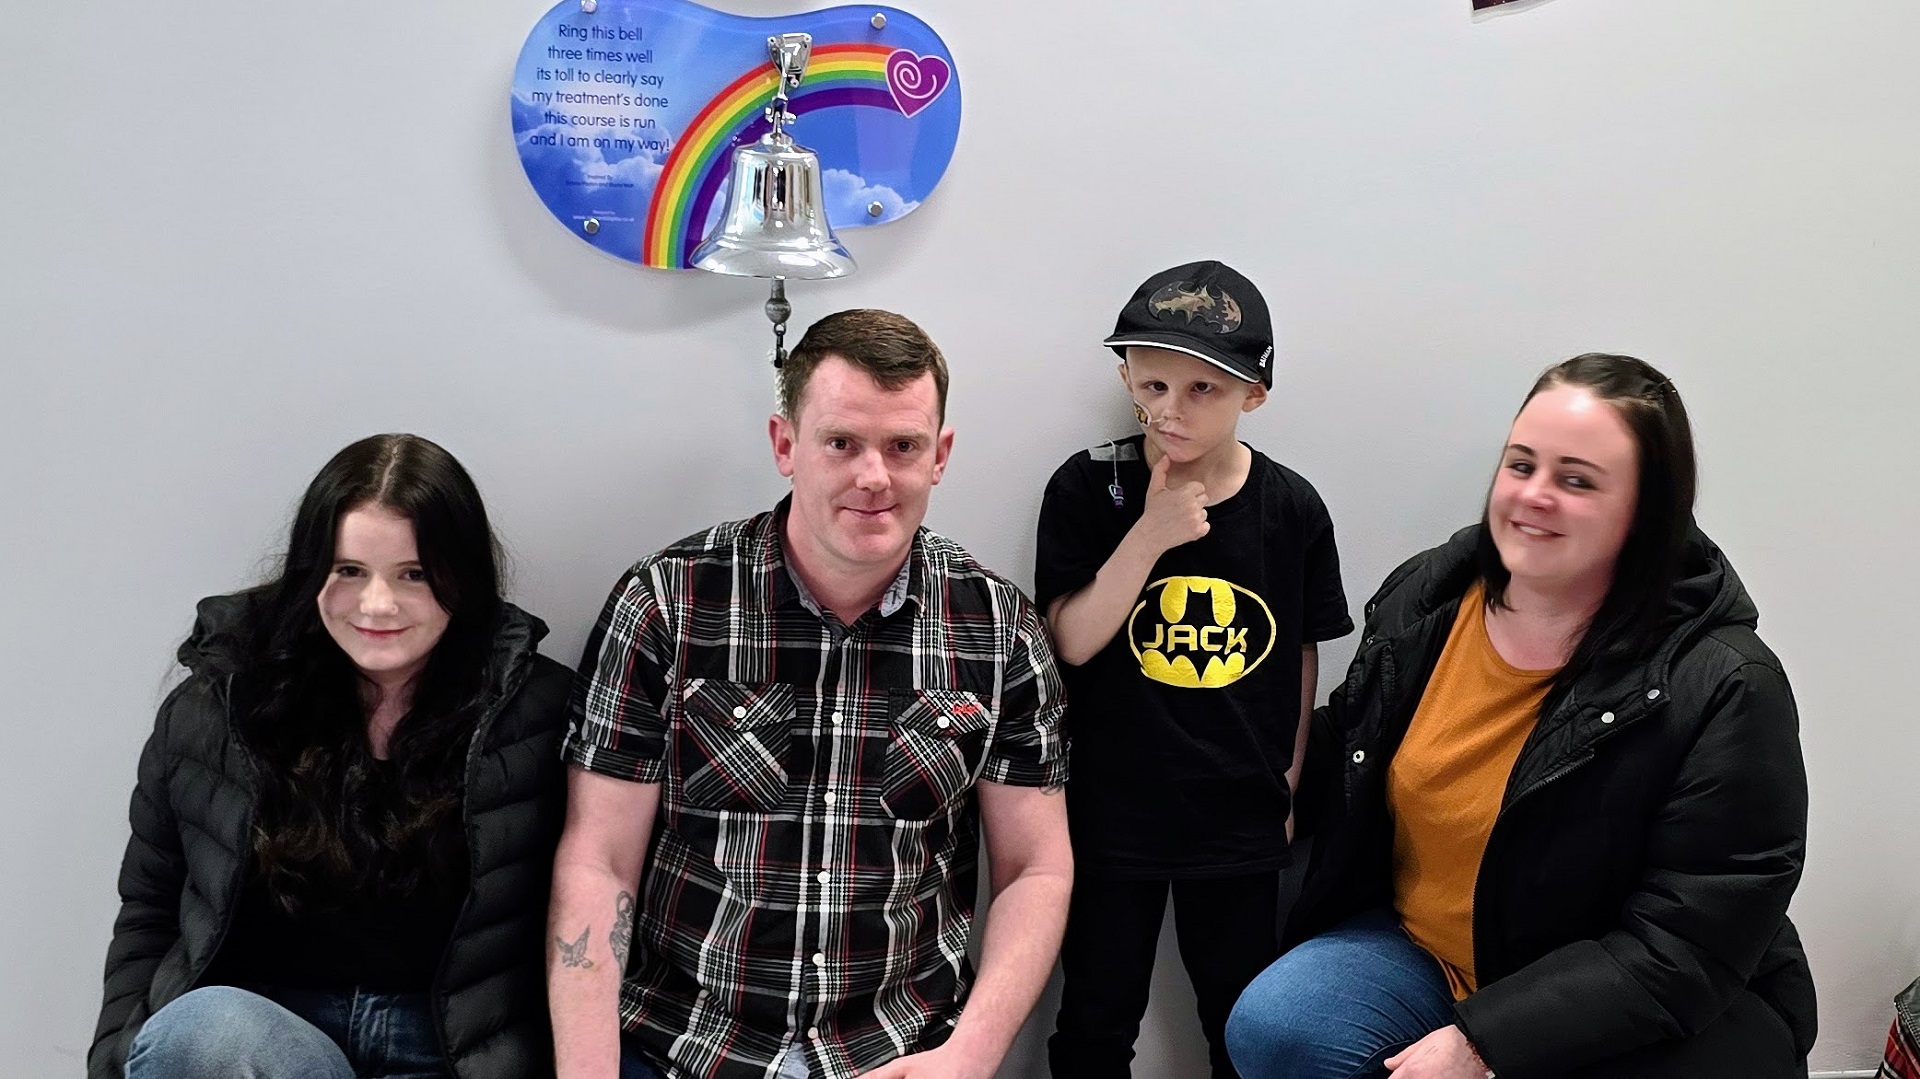 Jack Bourne and family ringing cancer treatment bell at Birmingham Children's Hospital